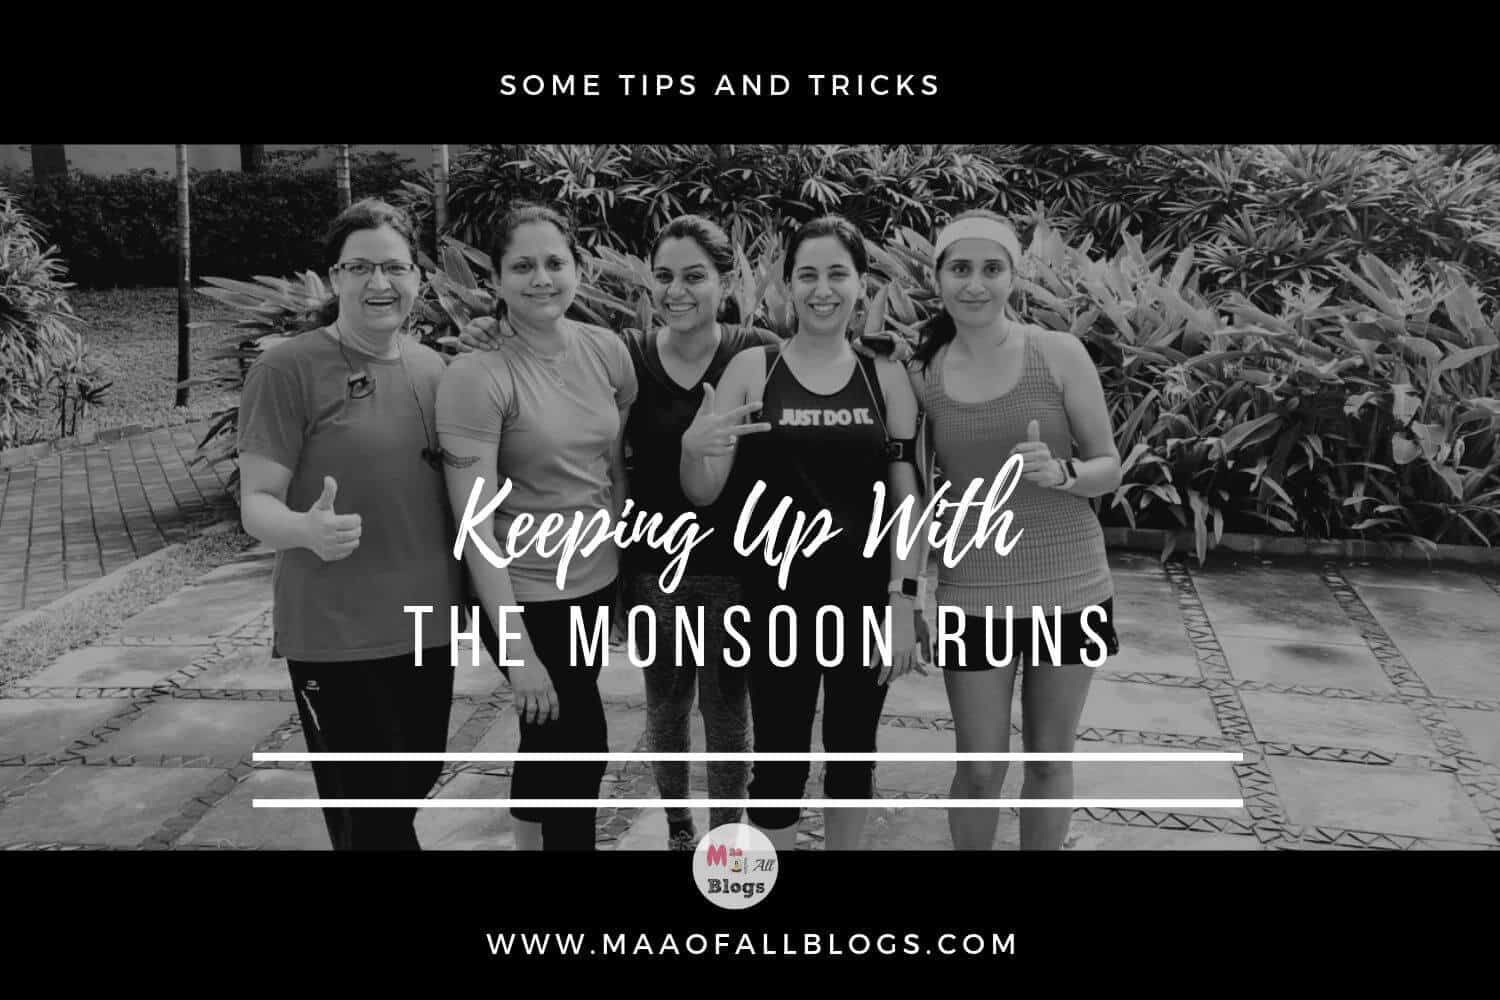 Keeping up with the monsoon runs some tips and tricks